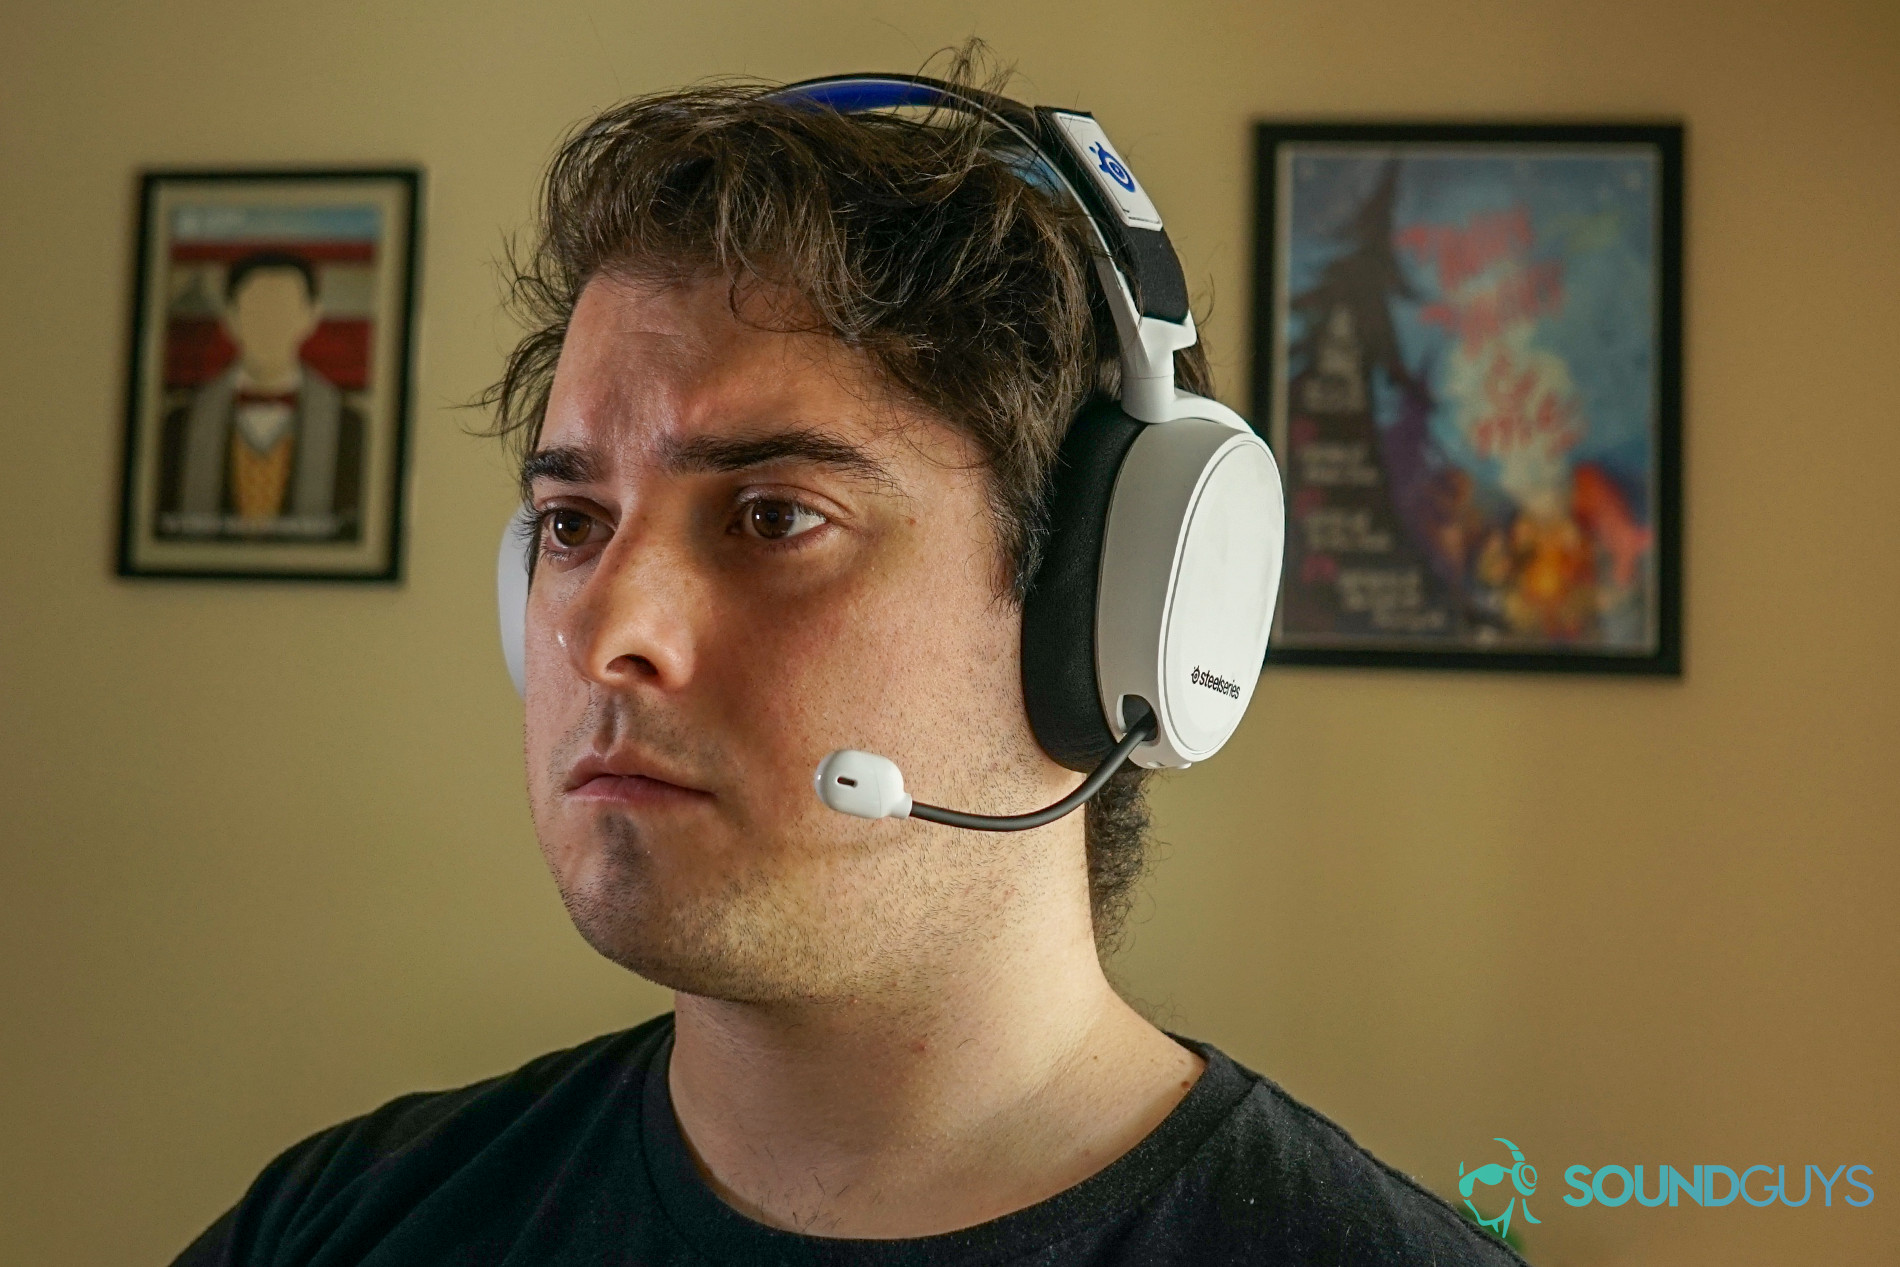 A man wears The SteelSeries Arctis 7P gaming headset in front of posters for My Brother, My Brother, and Me, and a Canadian Heritage Minute 